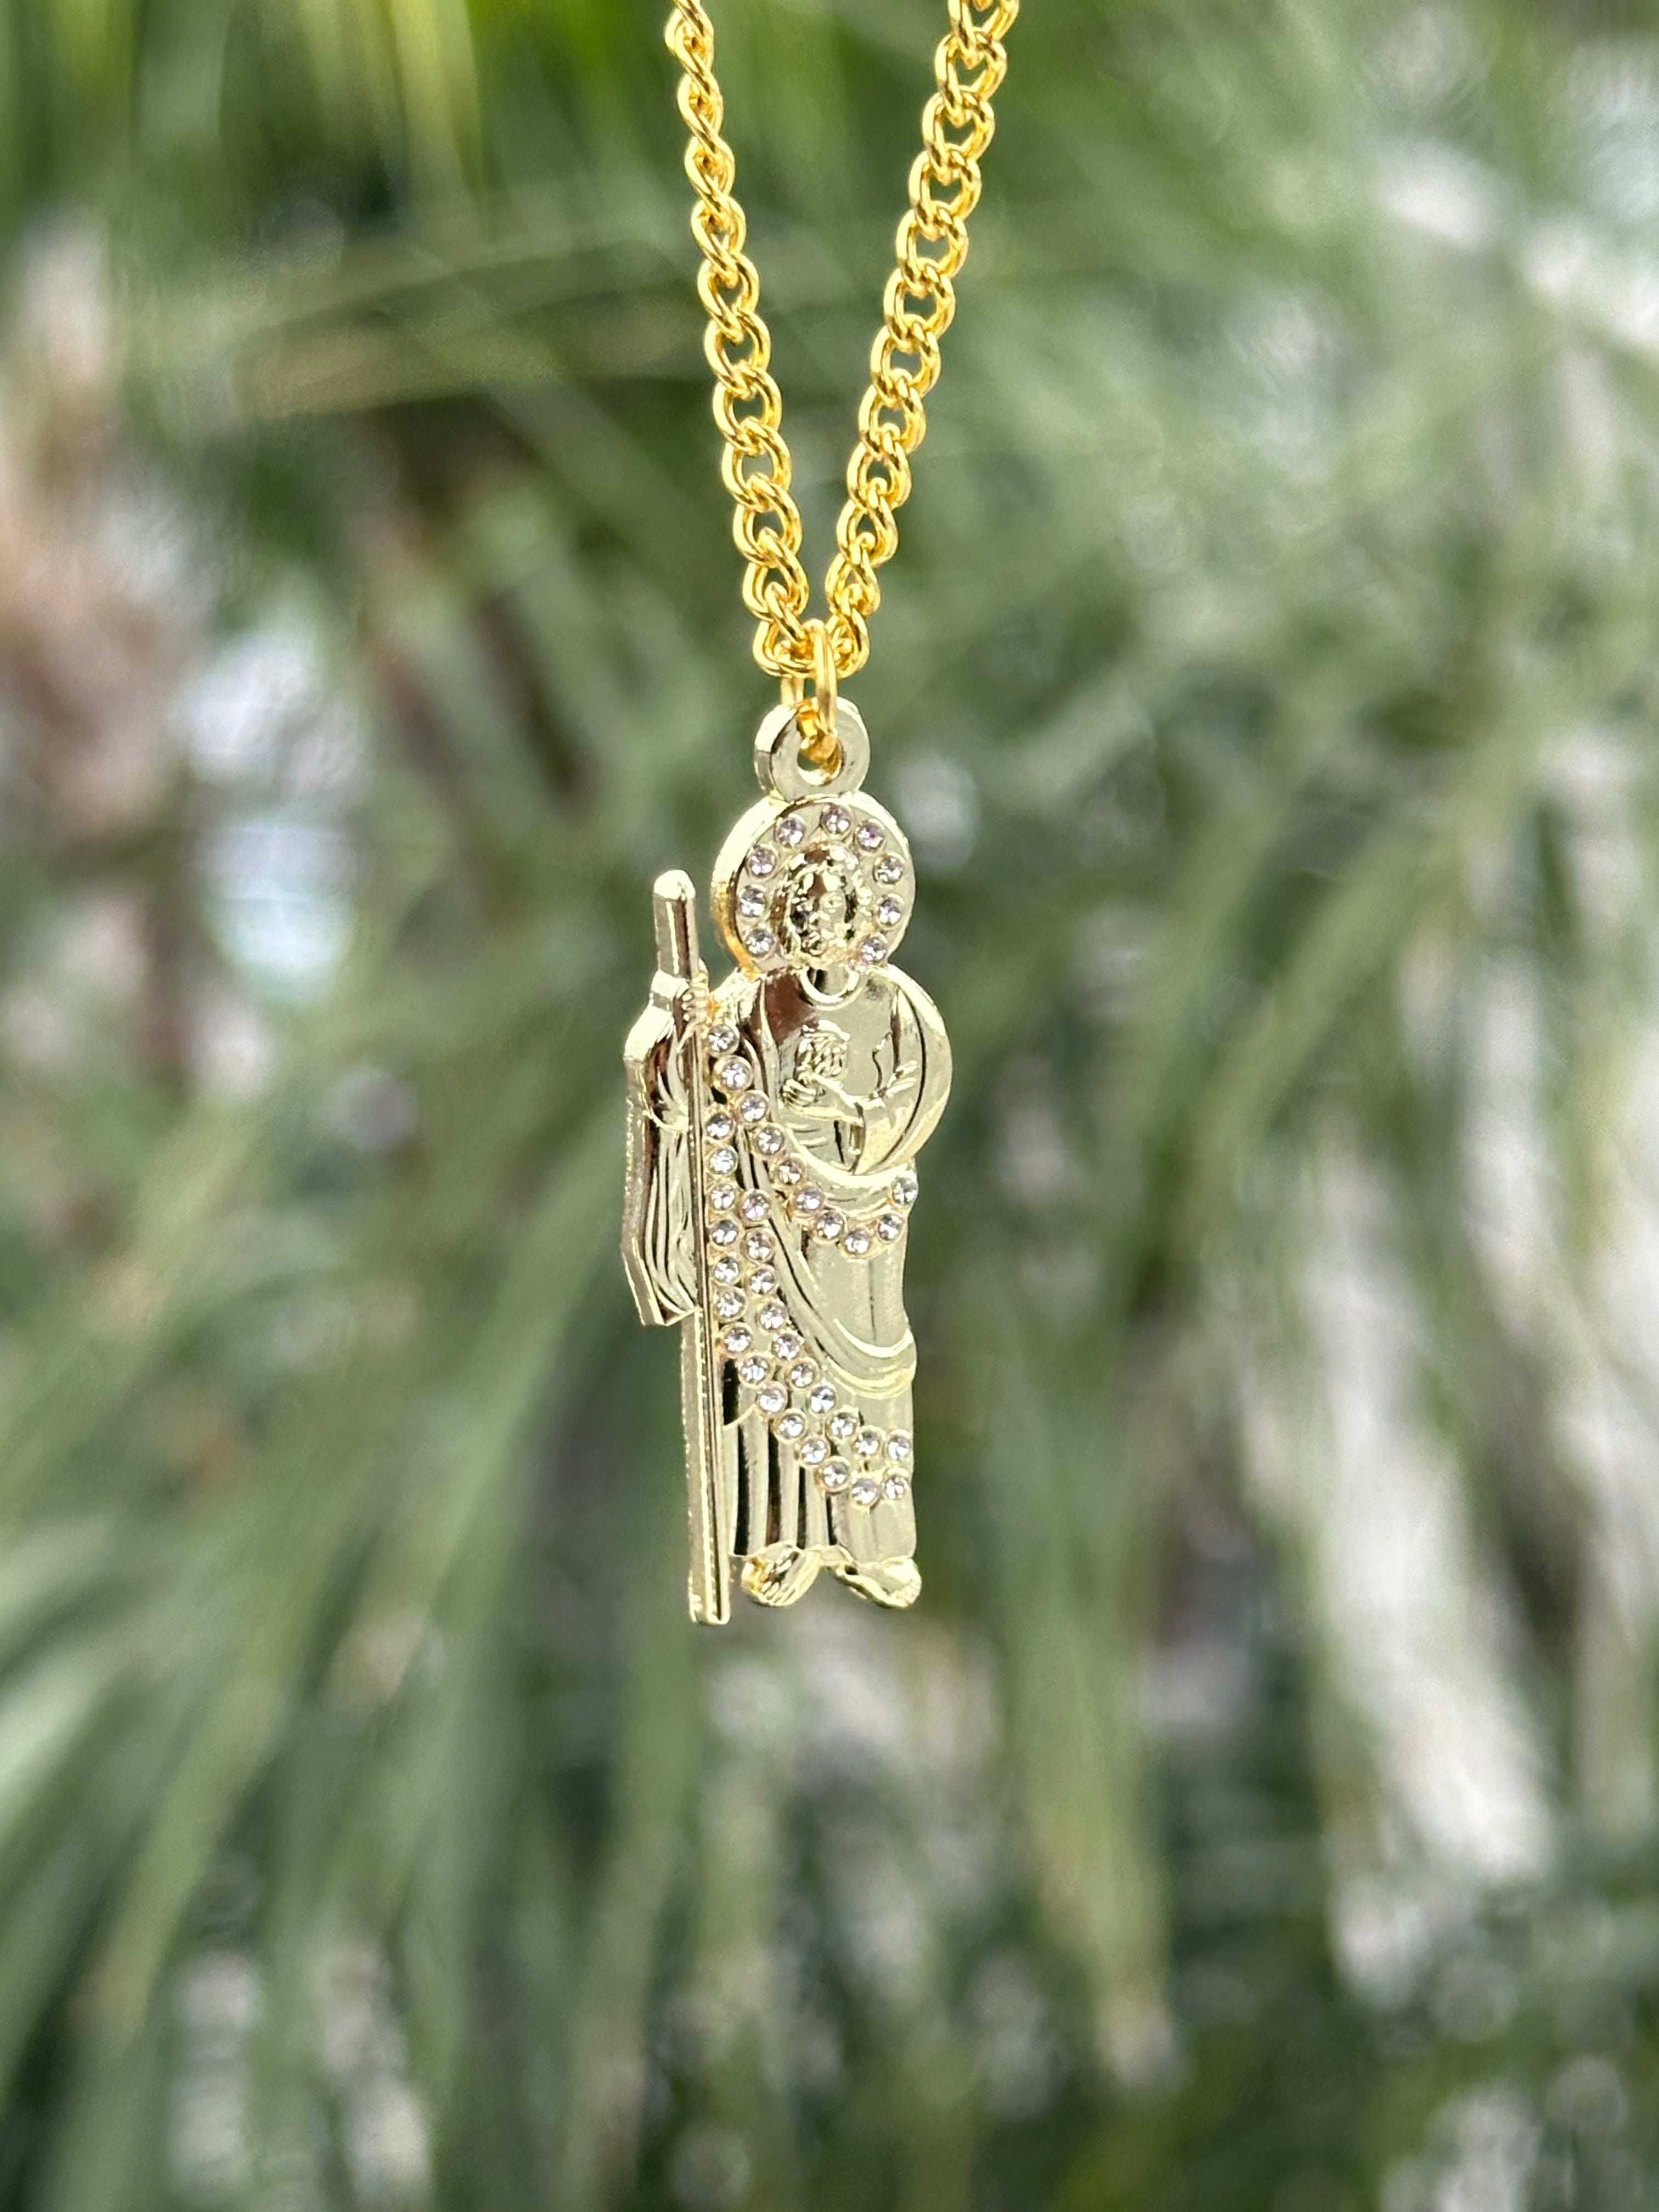 *NEW GOLD "SAN JUDAS TADEO" EXCLUSIVE CHAIN VERY LIMITED